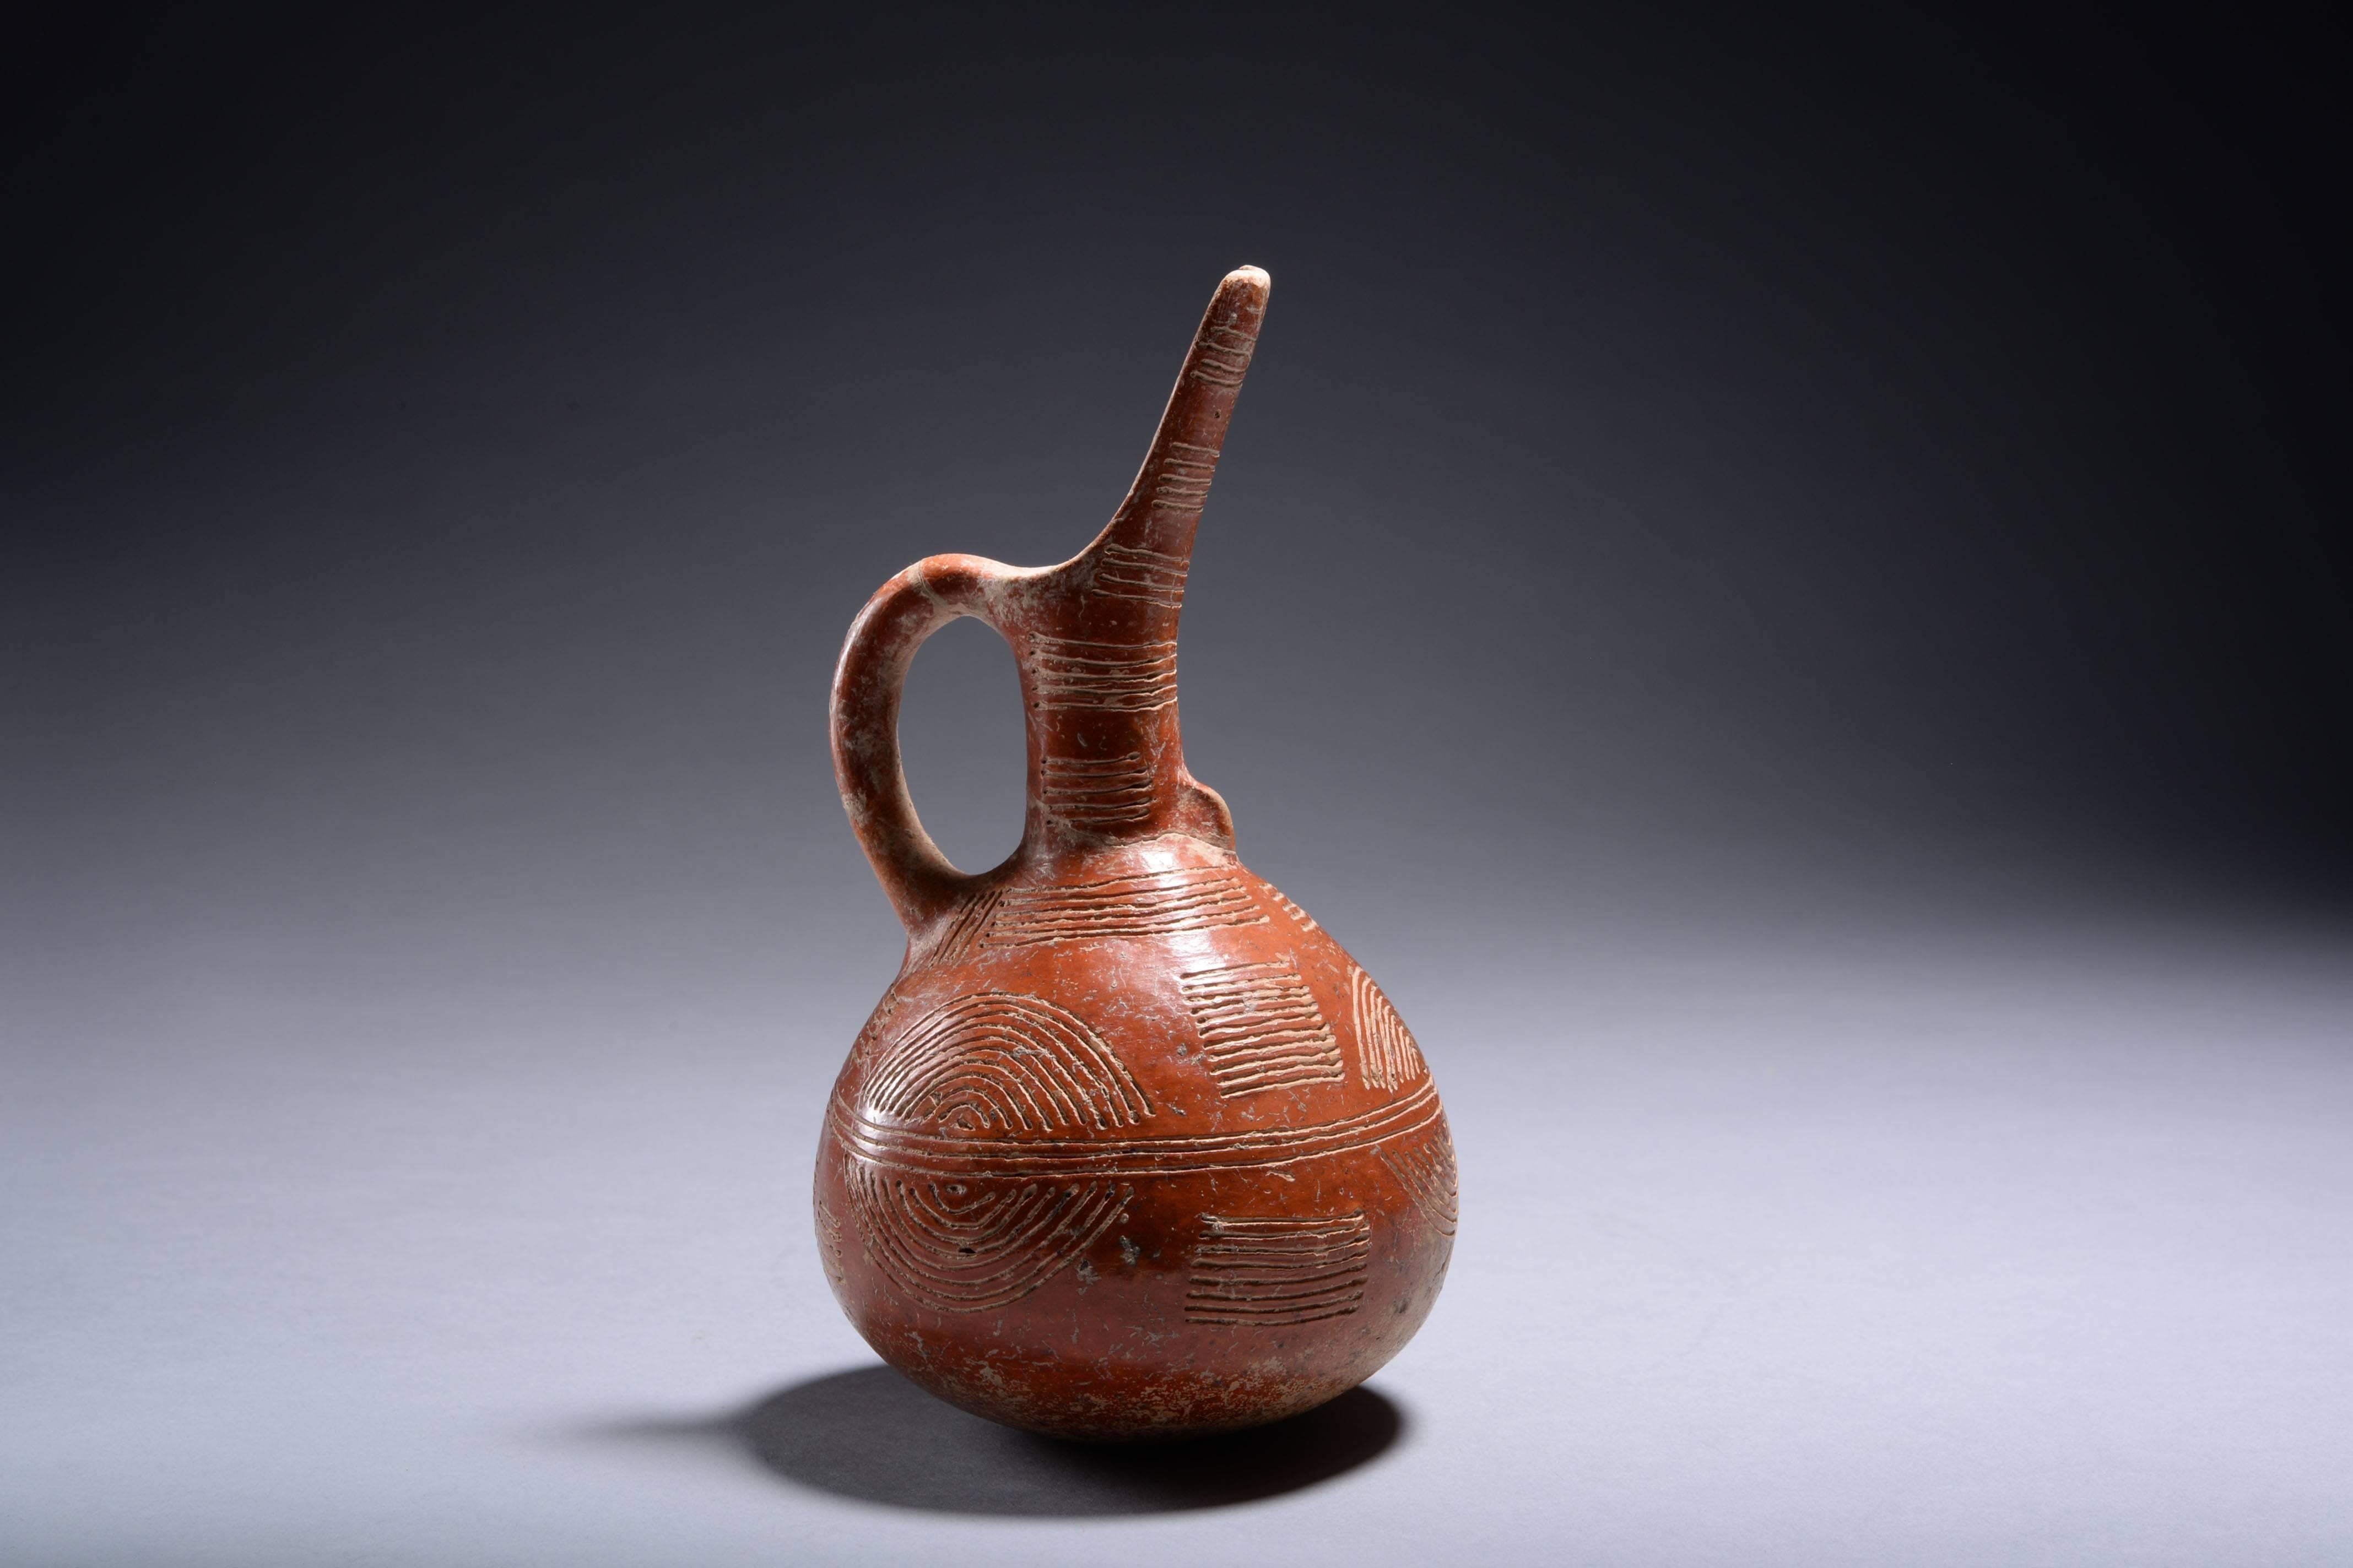 European Cypriot Early Bronze Age Red Polished Ware Beaked Jug, 2300 BC